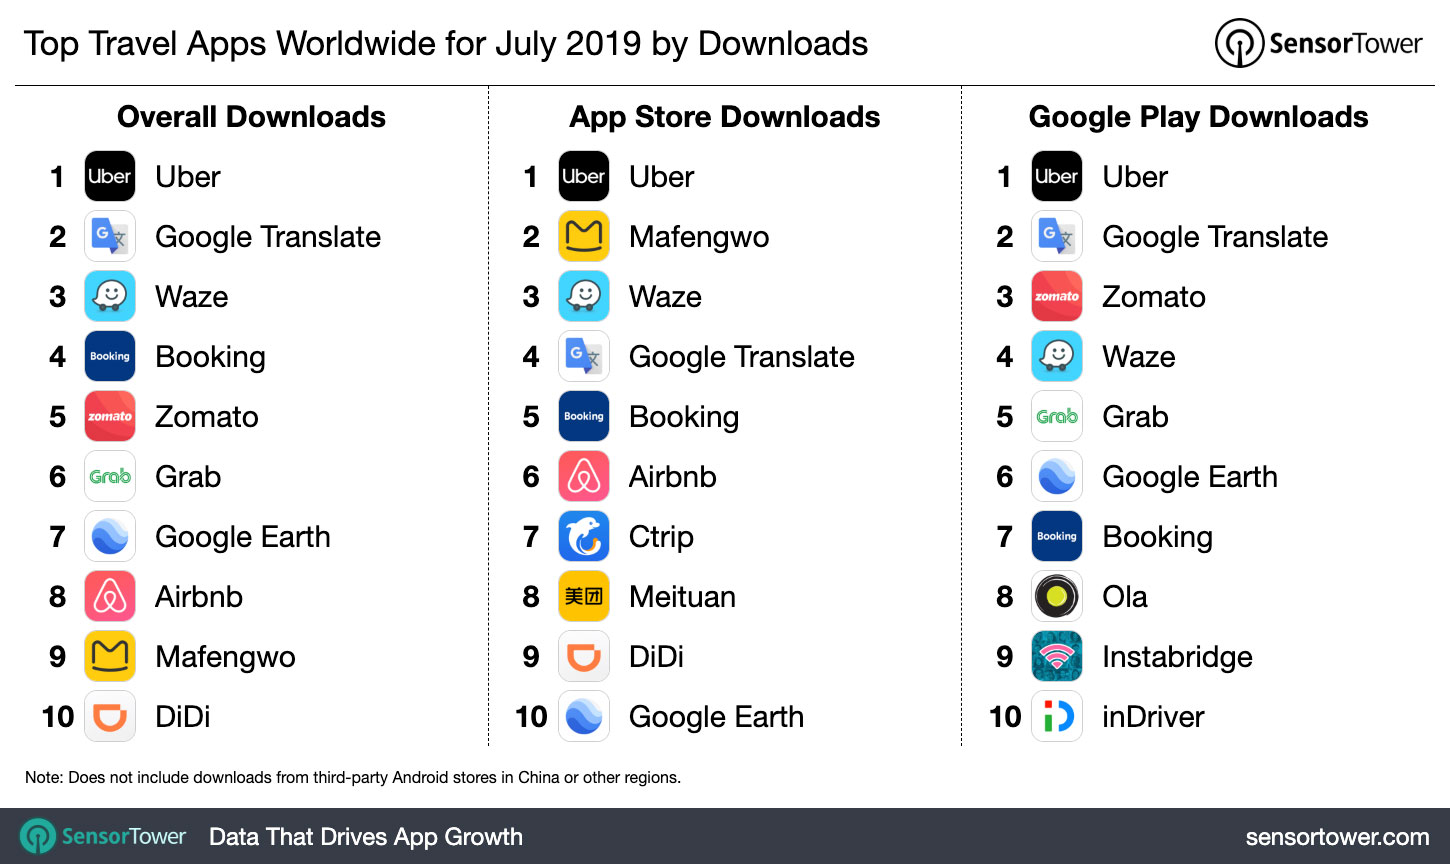 Top Travel Apps Worldwide for July 2019 by Downloads